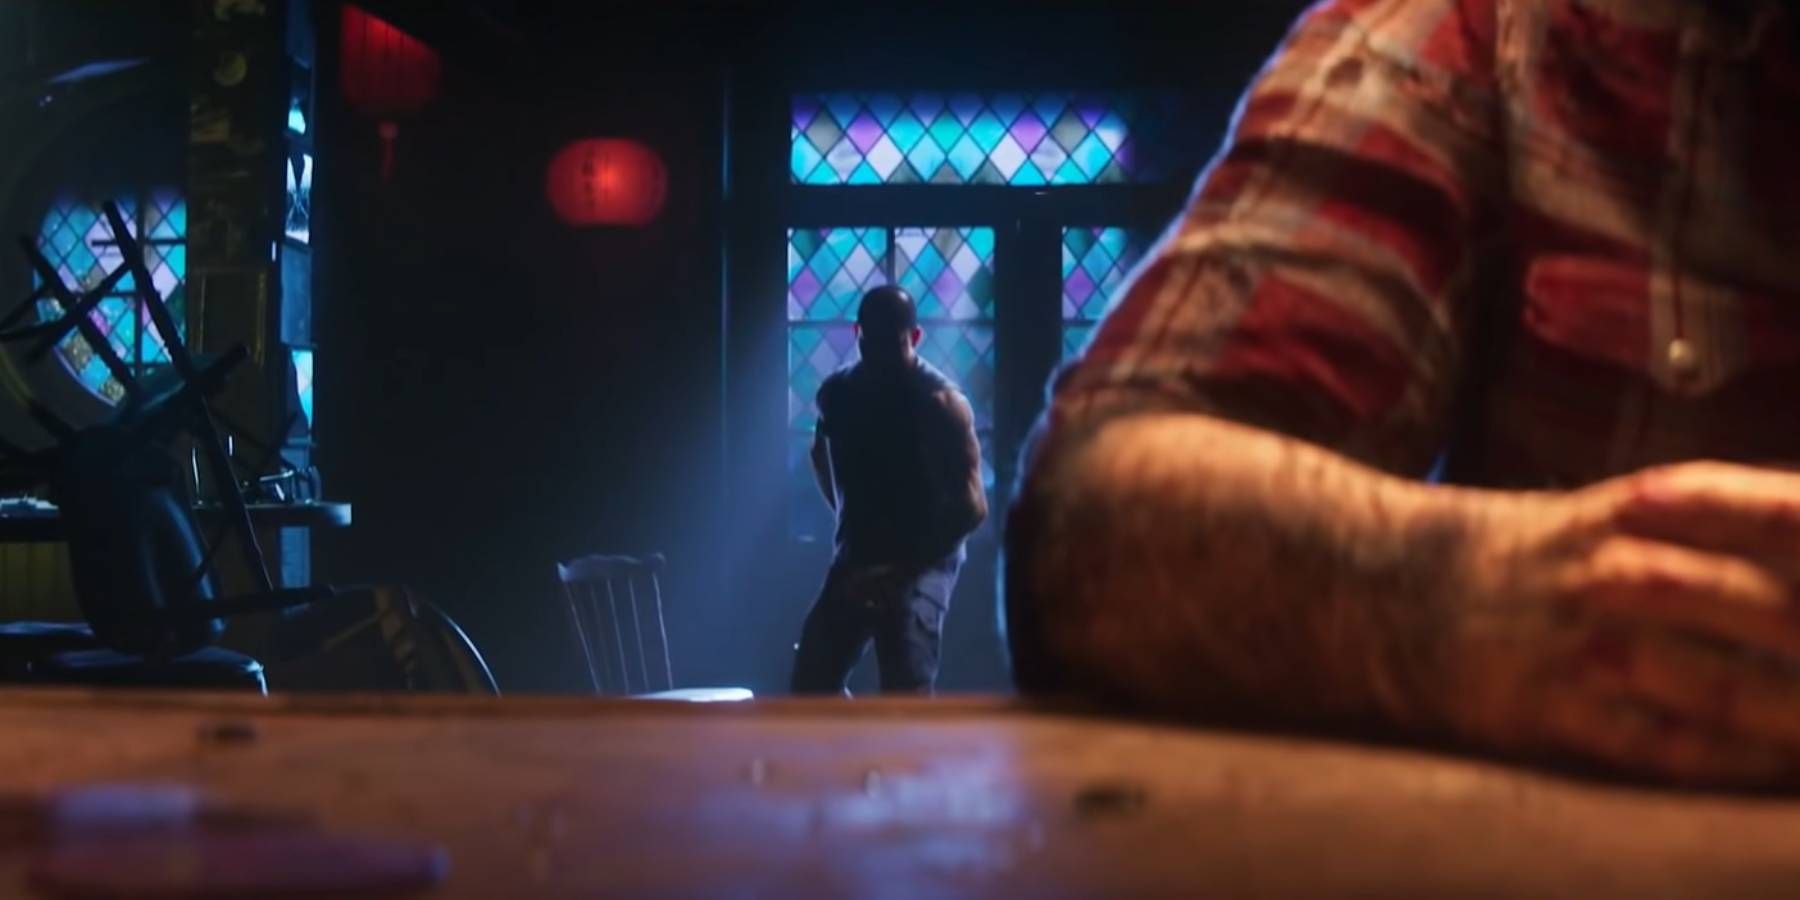 A man obscured by shadows approaching Logan in the trailer for Marvel's Wolverine